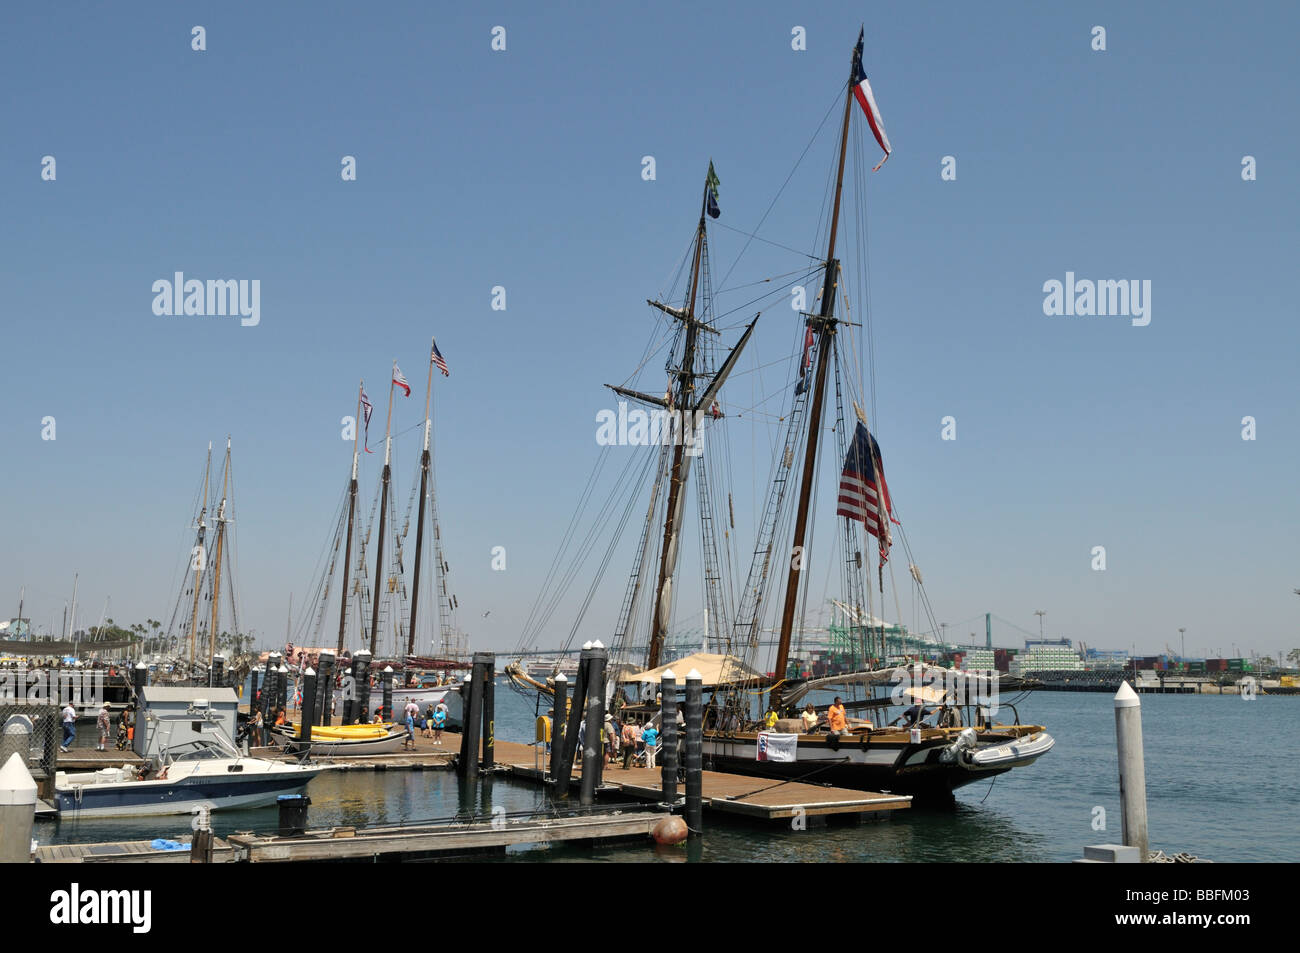 Ships docked along the main channel of Port of Los Angeles Stock Photo